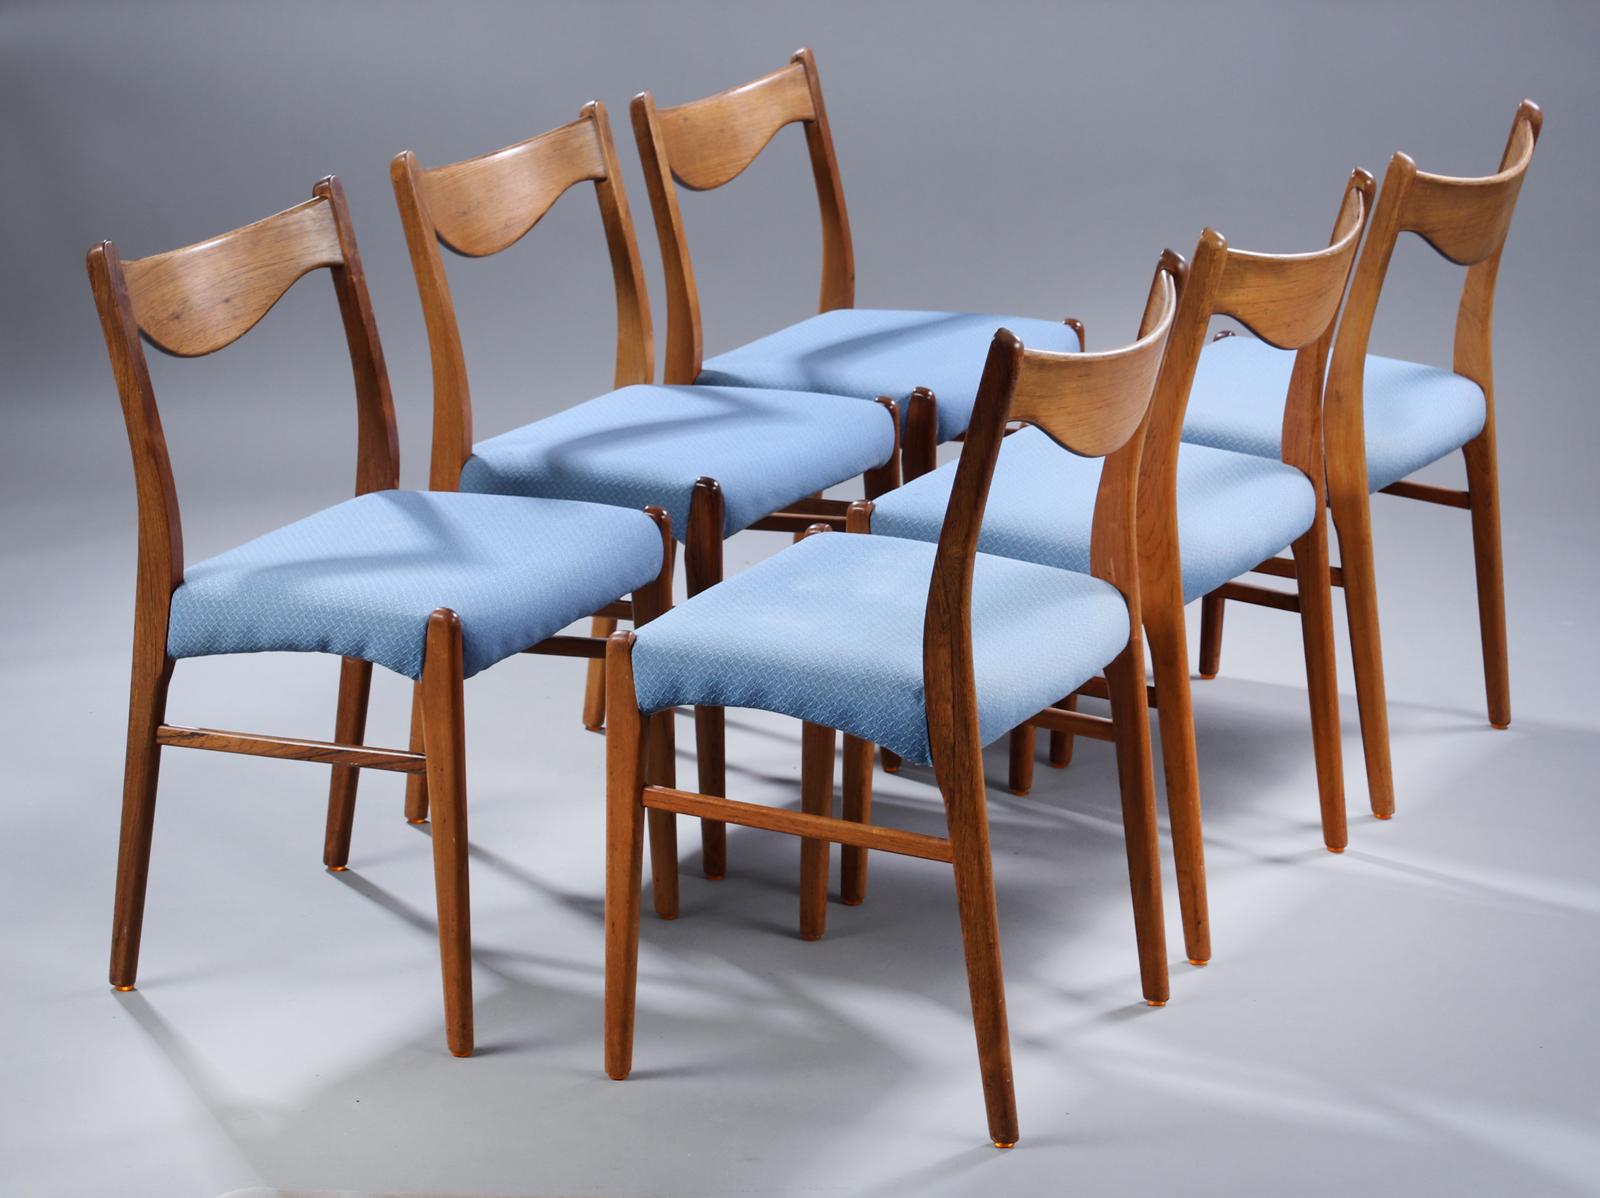 Arne Wahl Iversen. Set of six hardwood chairs, seats upholstered in blue fabric.
Measures: H. 79/45, B. 48 cm. Made at Glyngøre Stolefabrik, with stamp from here. Model GS61. Traces of wear, stains on cover. Good vintage condition. New upholstery